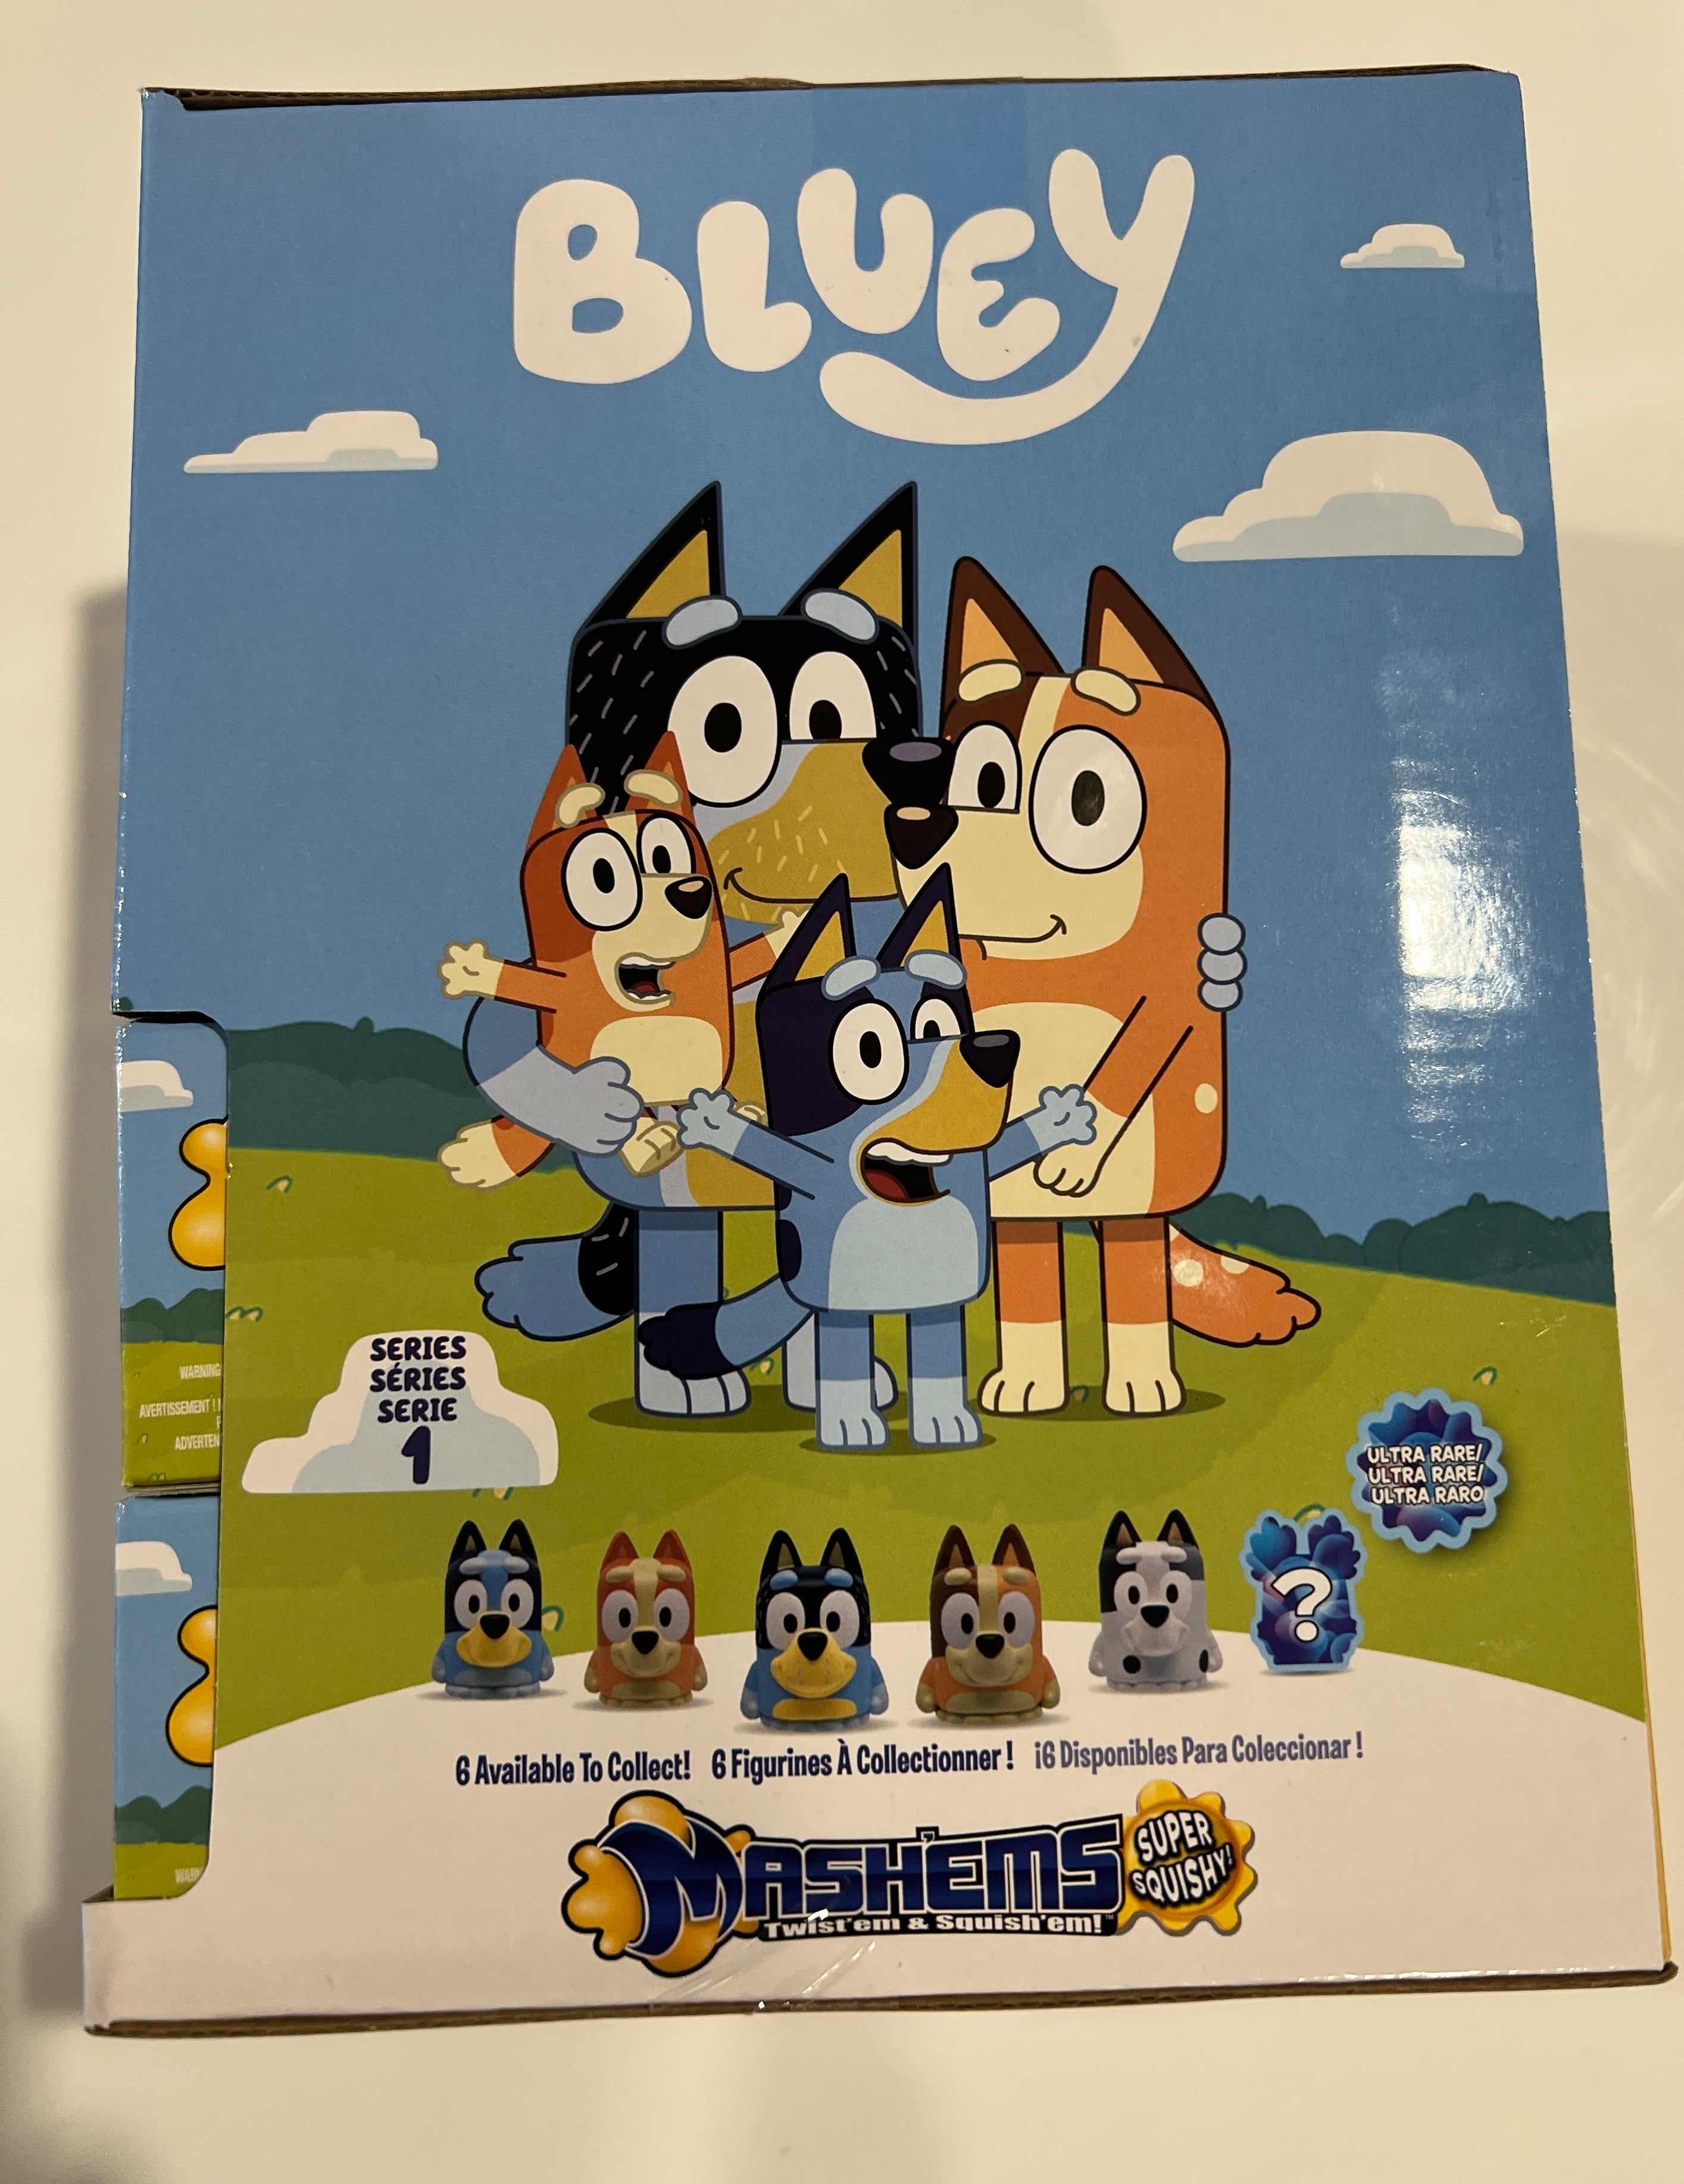 Bluey Mashems – The Prize Booth